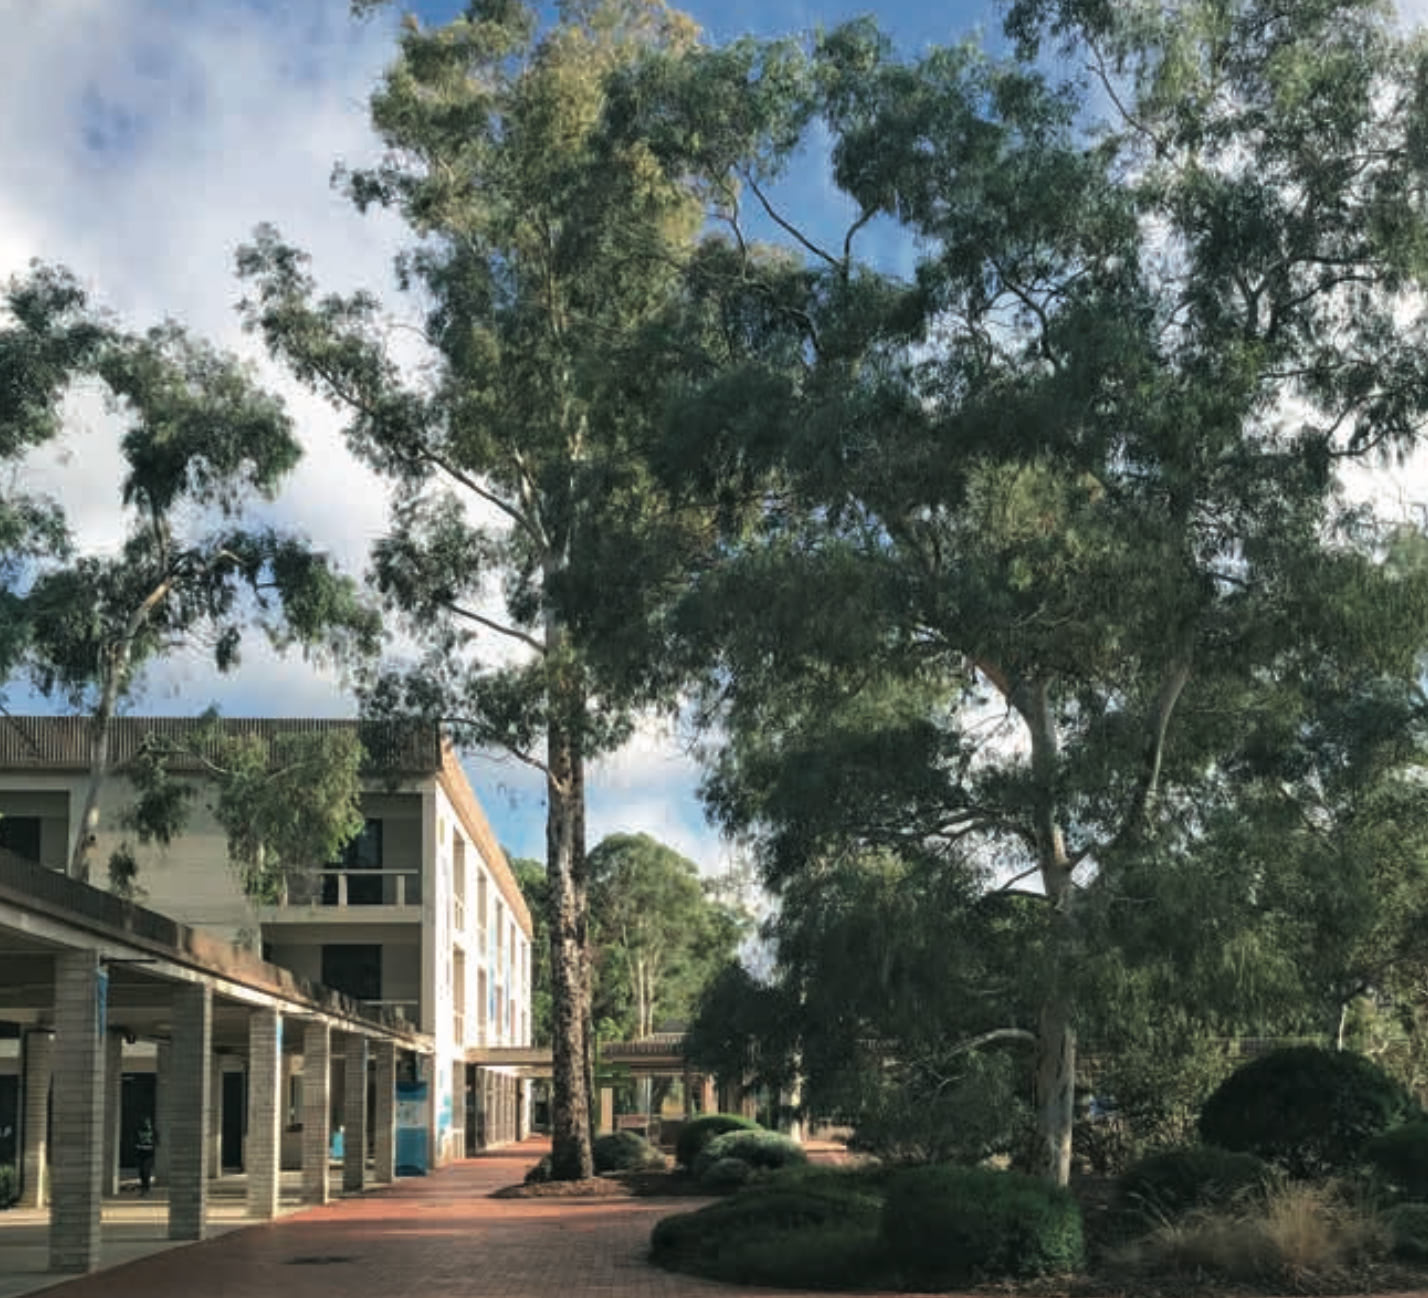 Urban trees in the ACT – Nature in the city